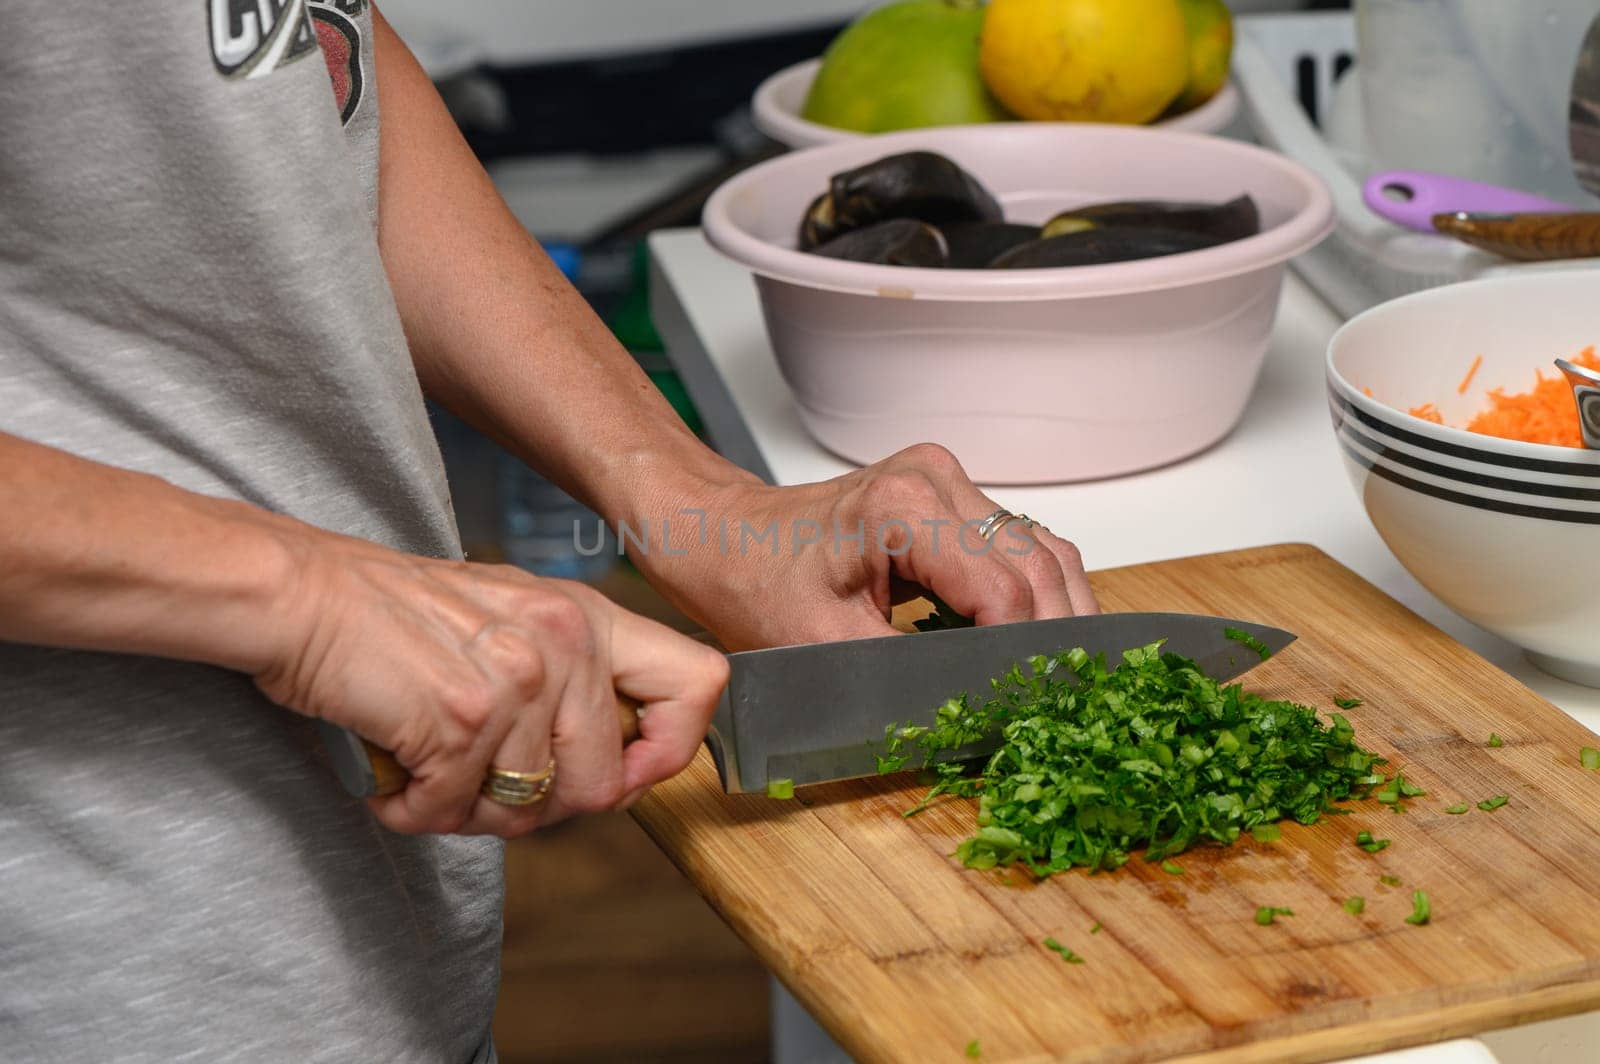 woman cutting parsley on a cutting board in the kitchen 3 by Mixa74